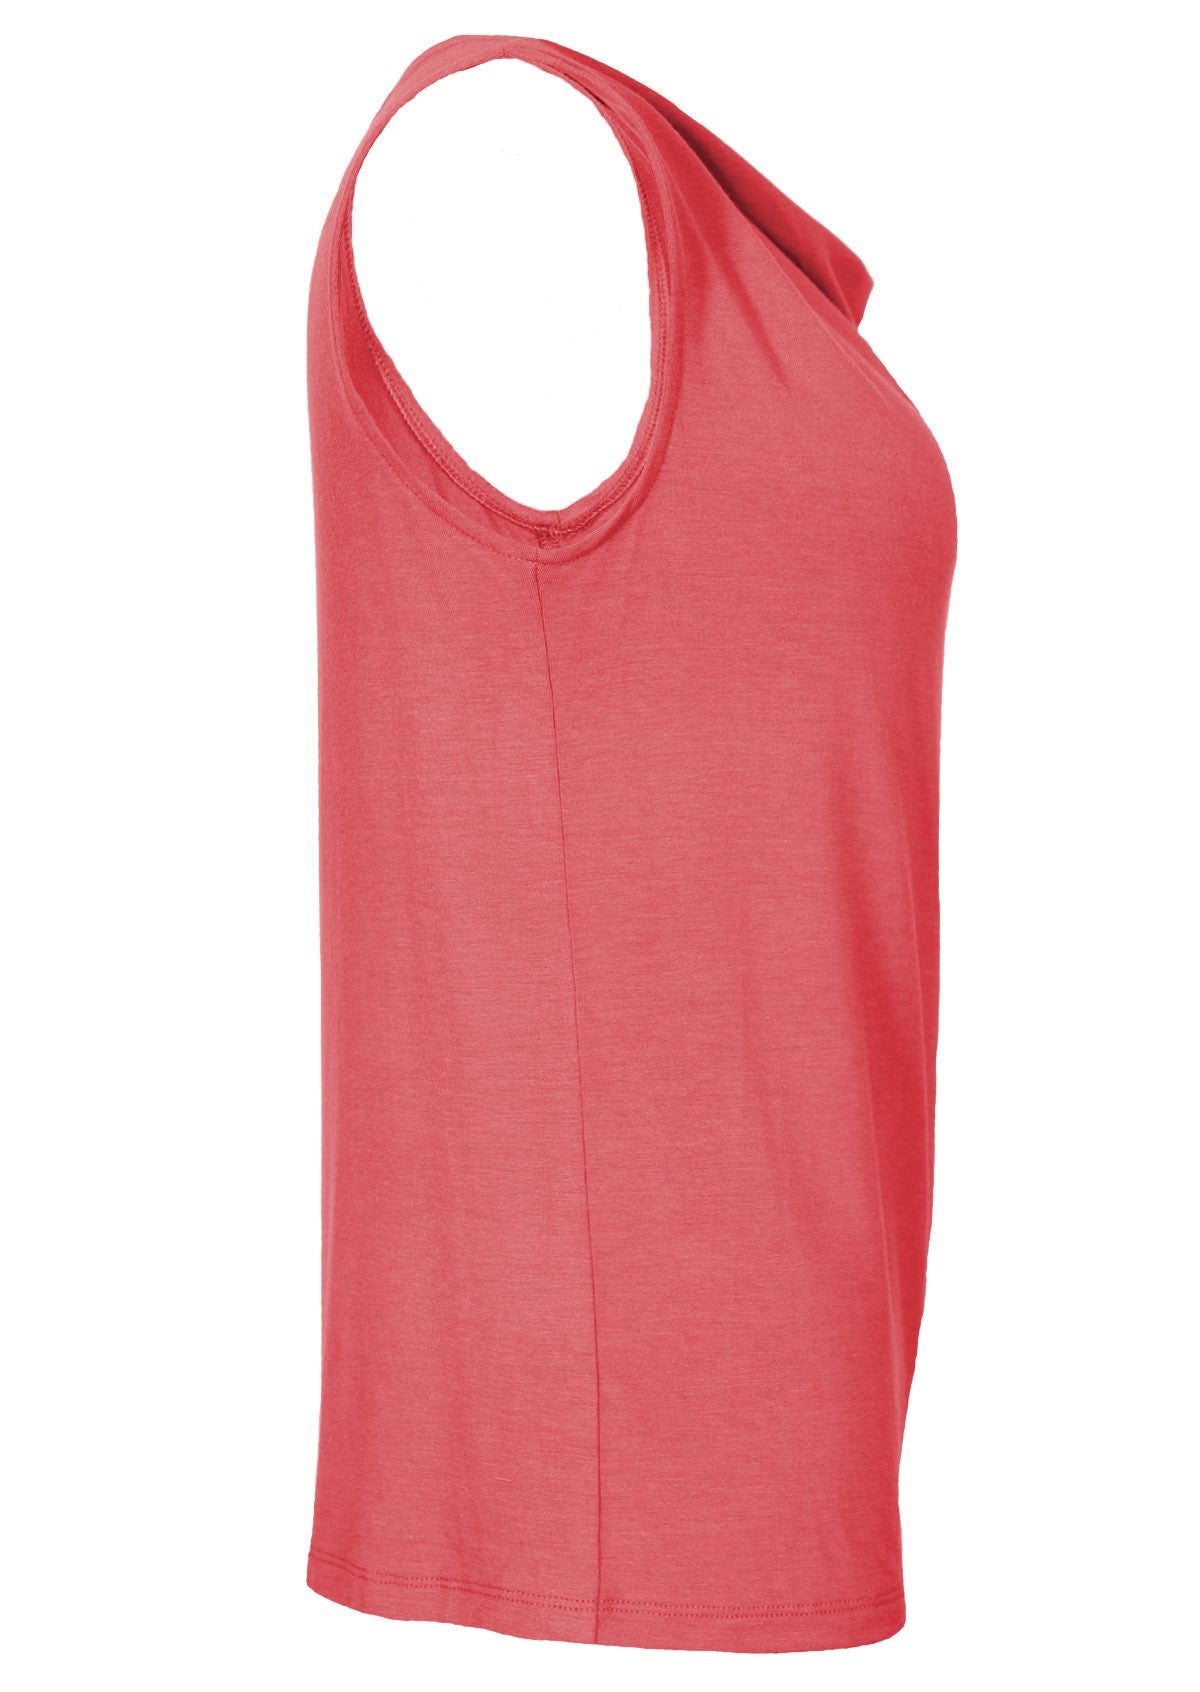 Side view sleeveless pink rayon top